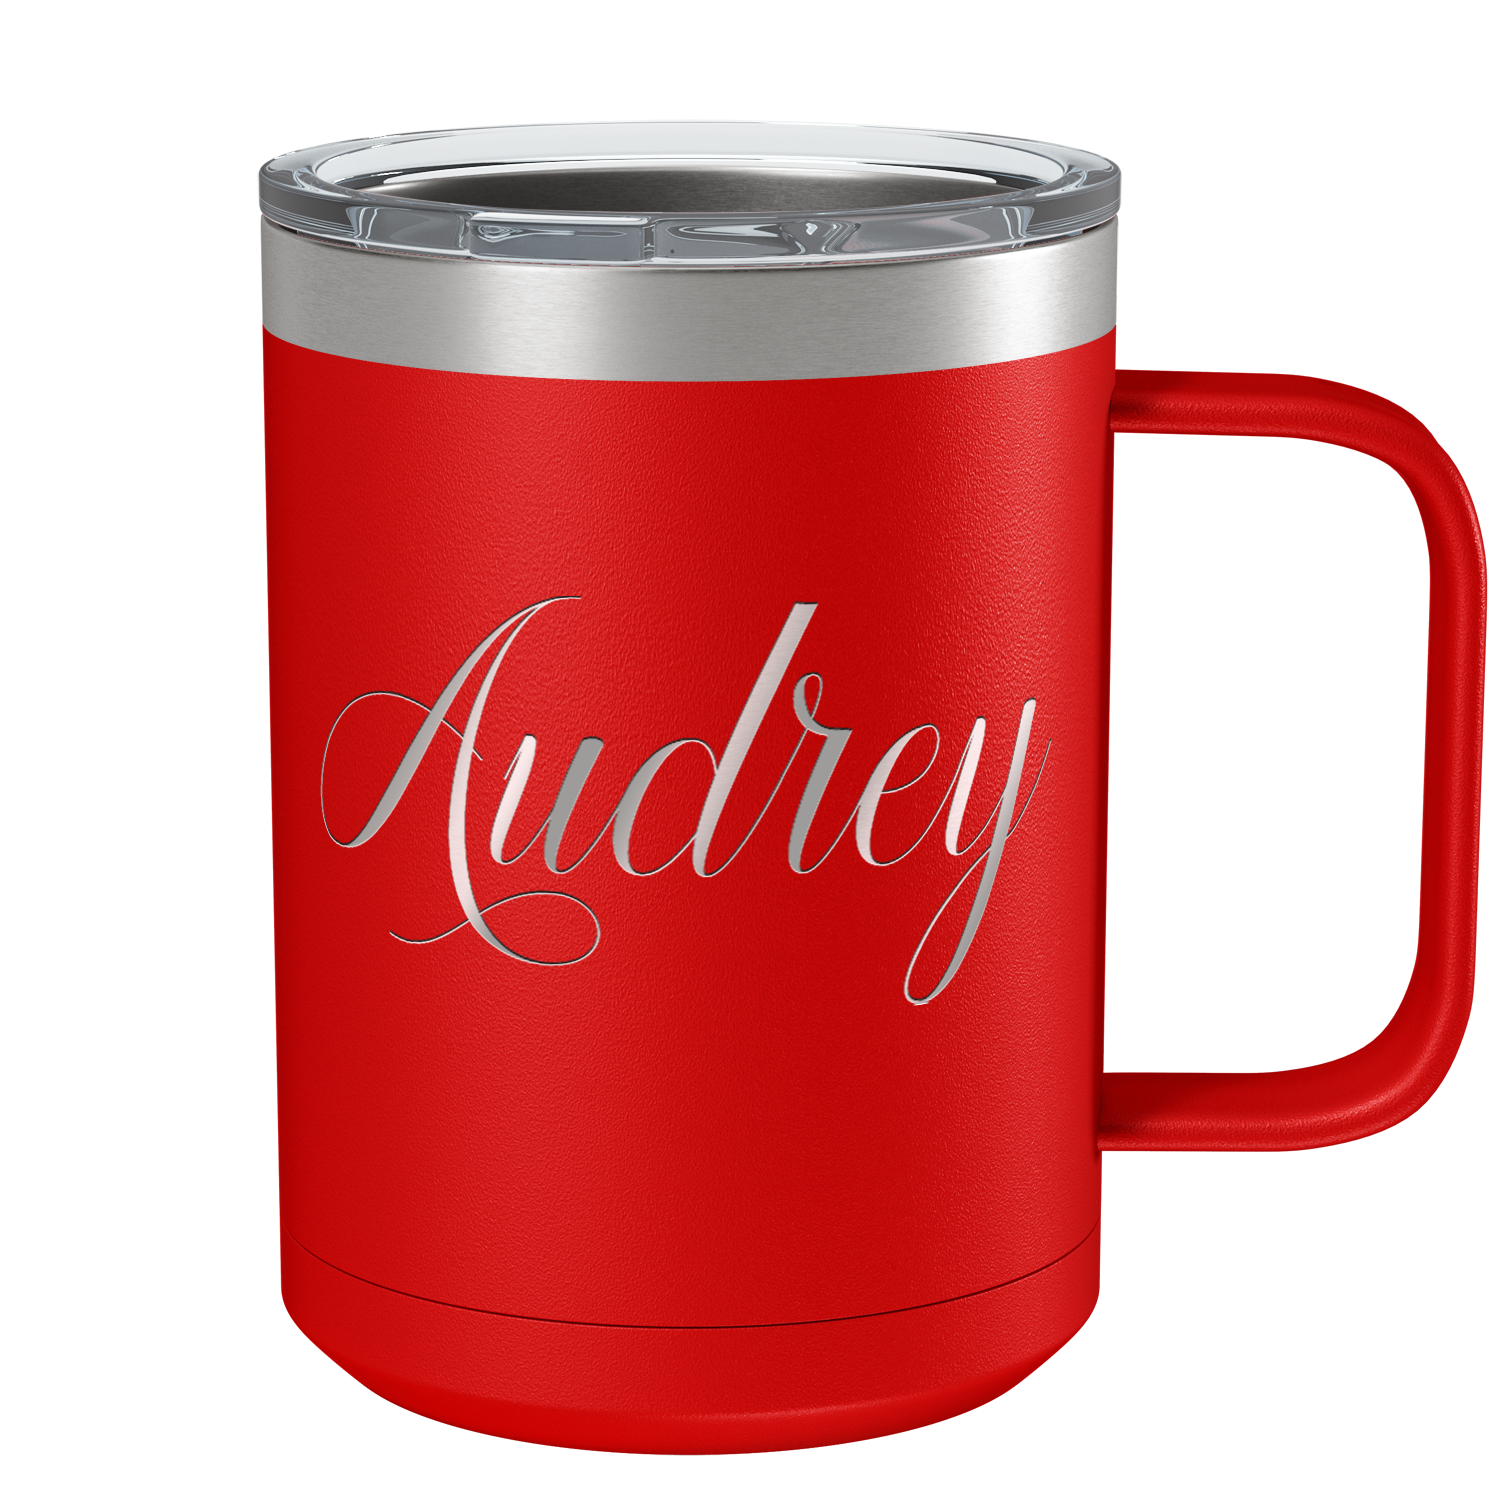 Cuptify Personalized Engraved 15 oz Stainless Steel Coffee Mug - Red